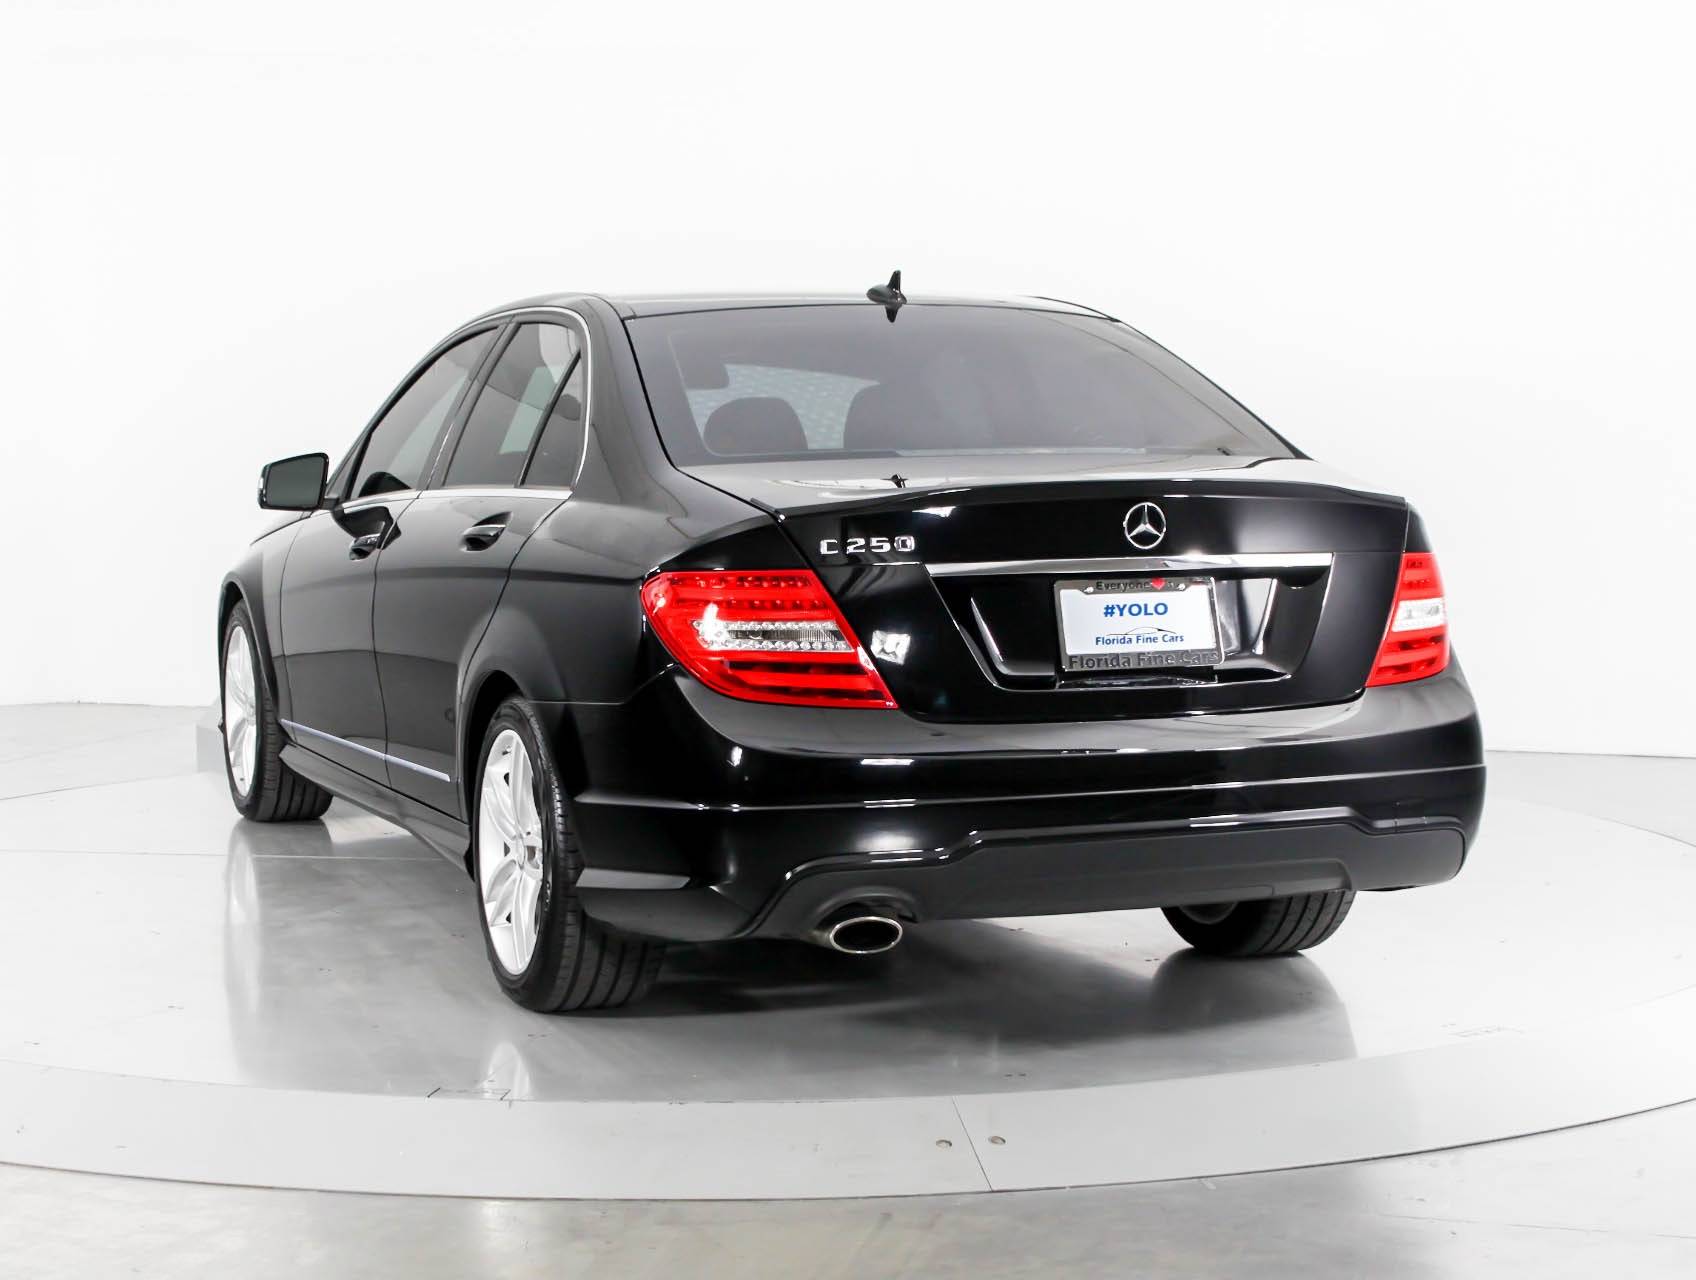 Florida Fine Cars - Used MERCEDES-BENZ C CLASS 2014 HOLLYWOOD C250